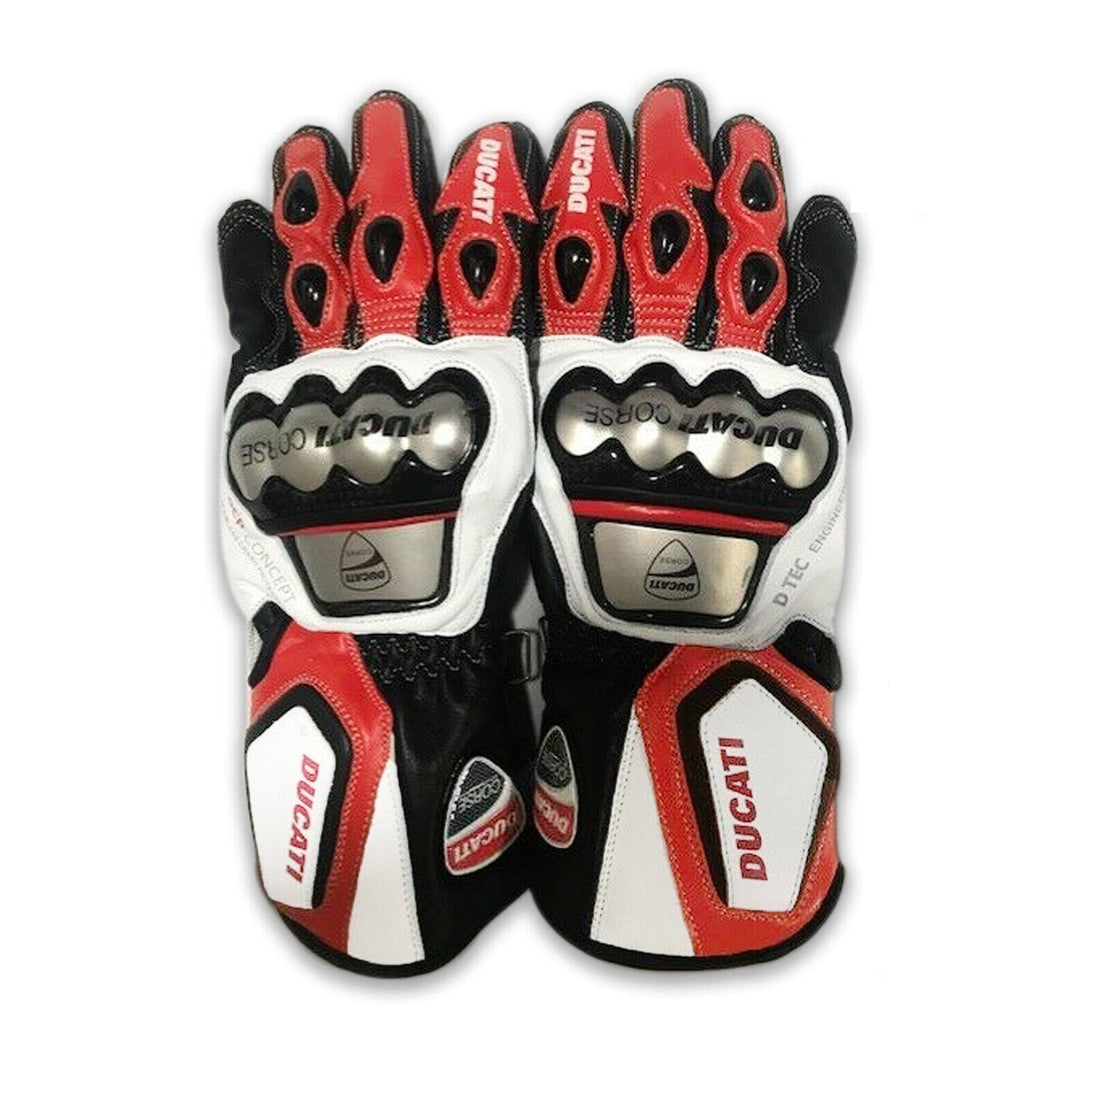 Ducati Corse New Leather Racing Motorbike Glove Pre-Curved Finger Motorcycle Glo